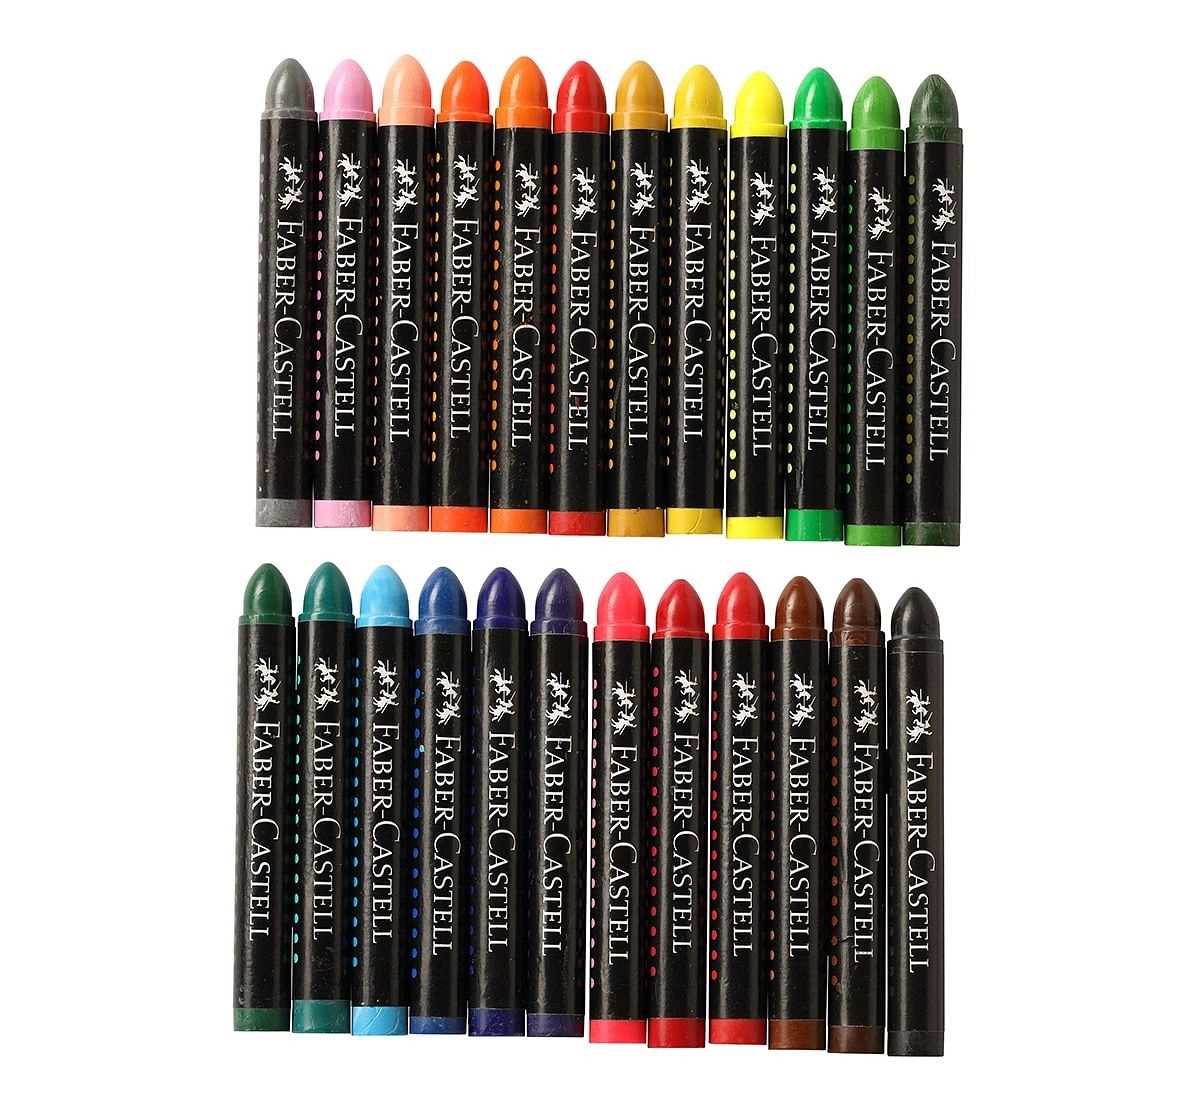 Faber-Castell Wax crayon jumbo 90mm pack of 24, 3Y+